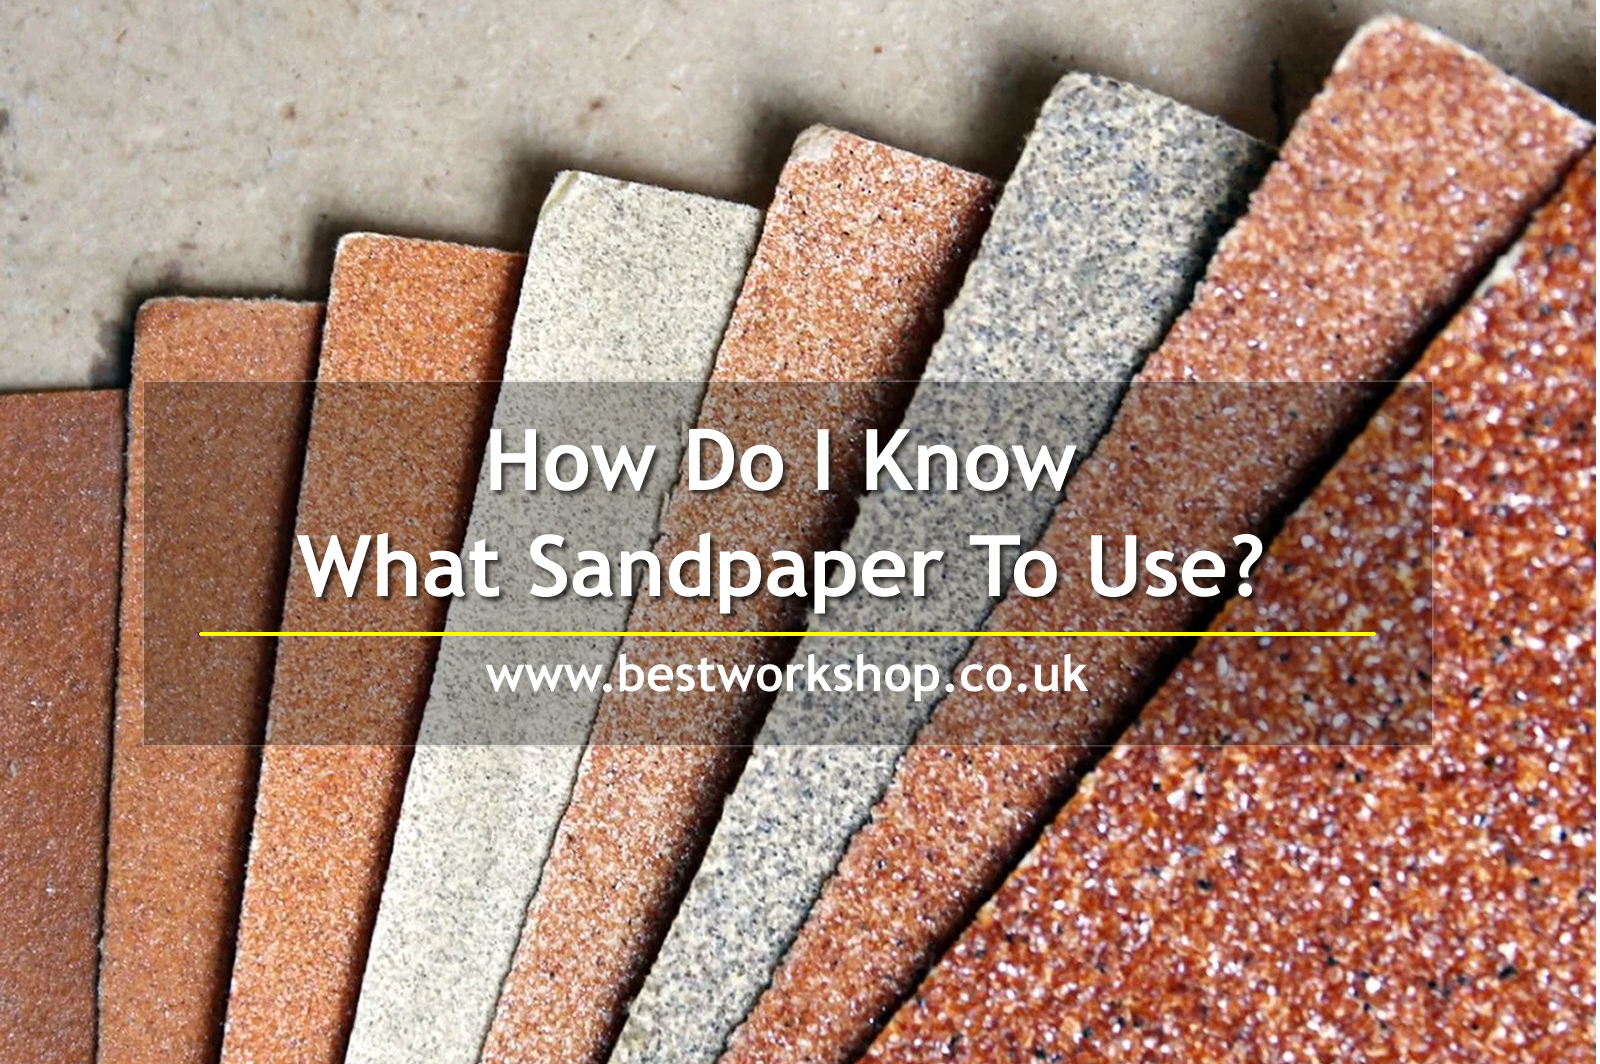 How Do I Know What Sandpaper To Use?